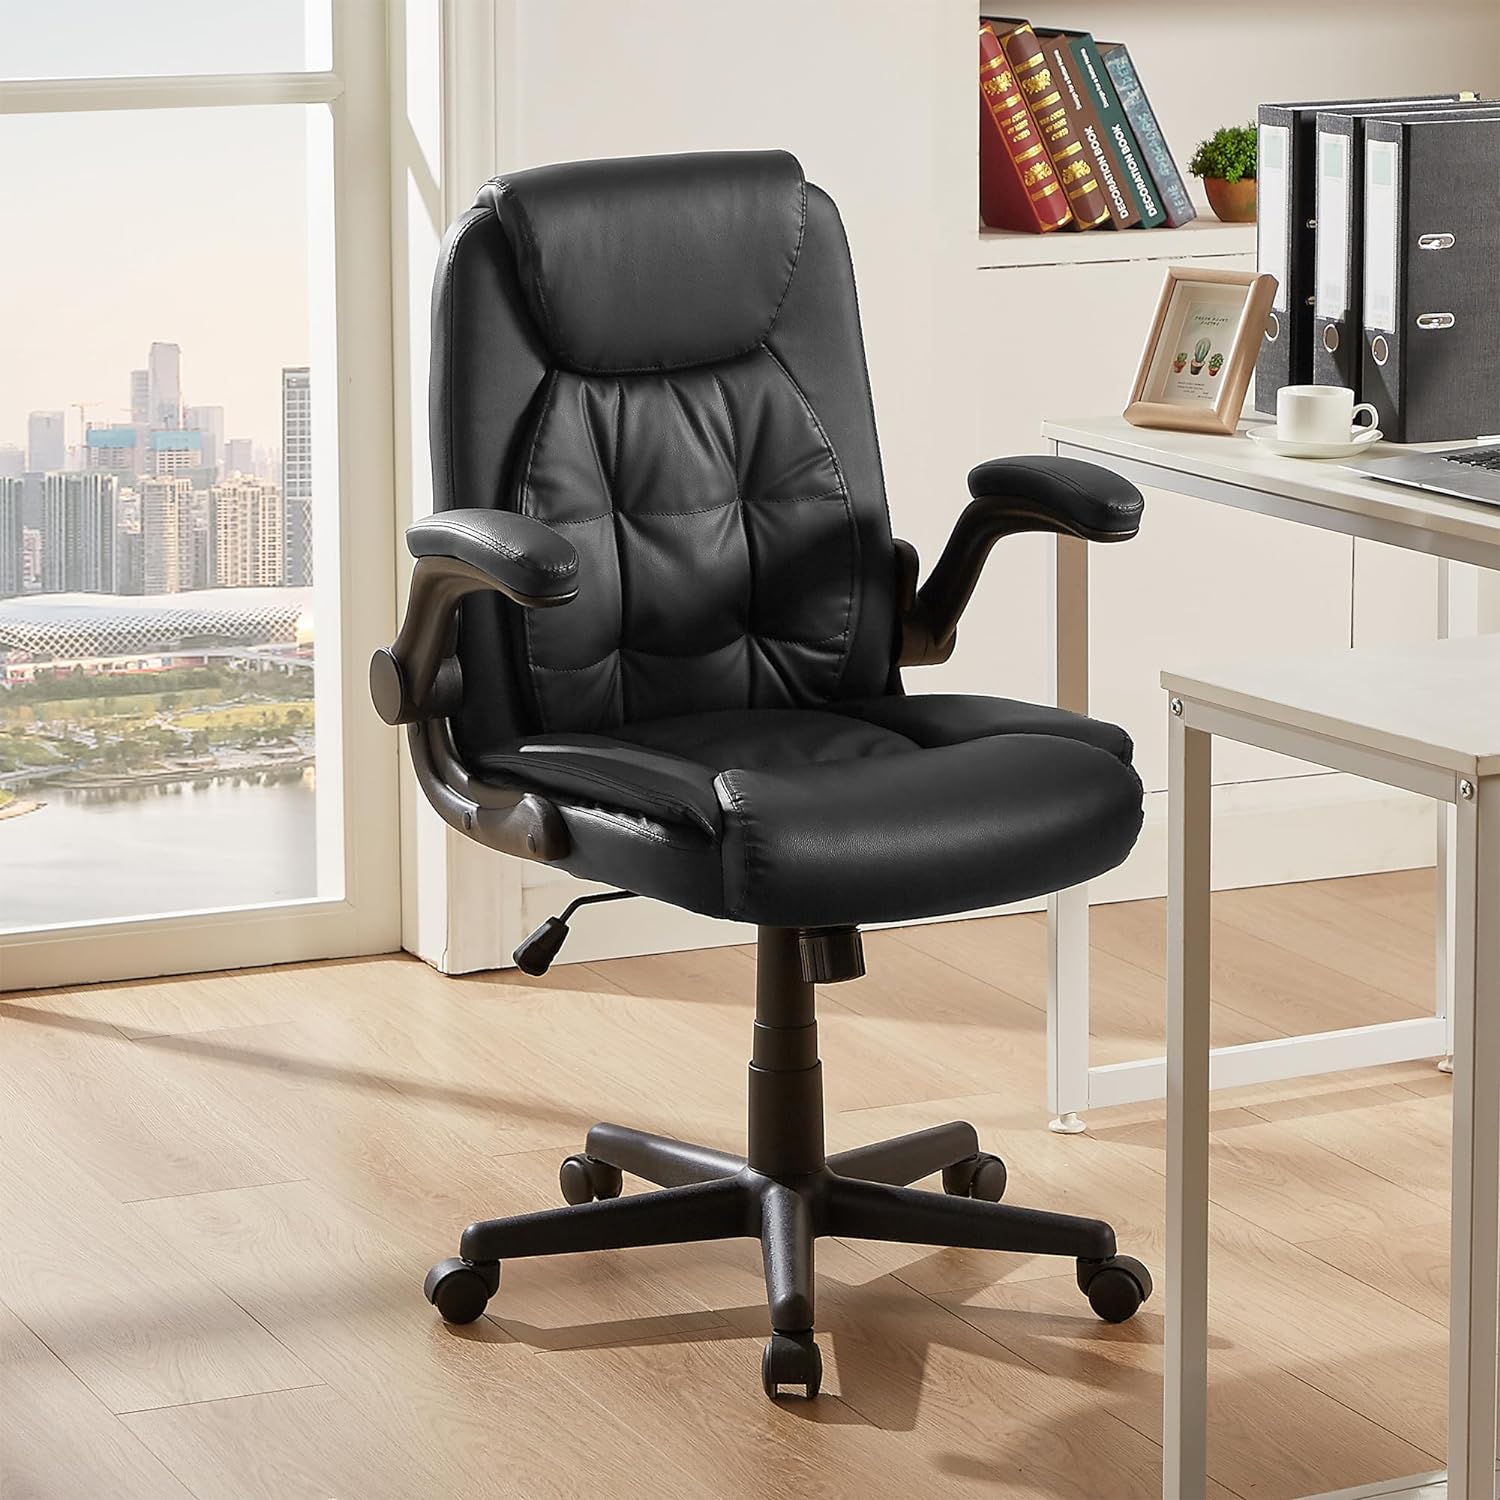 Executive High Back PU Leather Office Chair Rolling Swivel Black